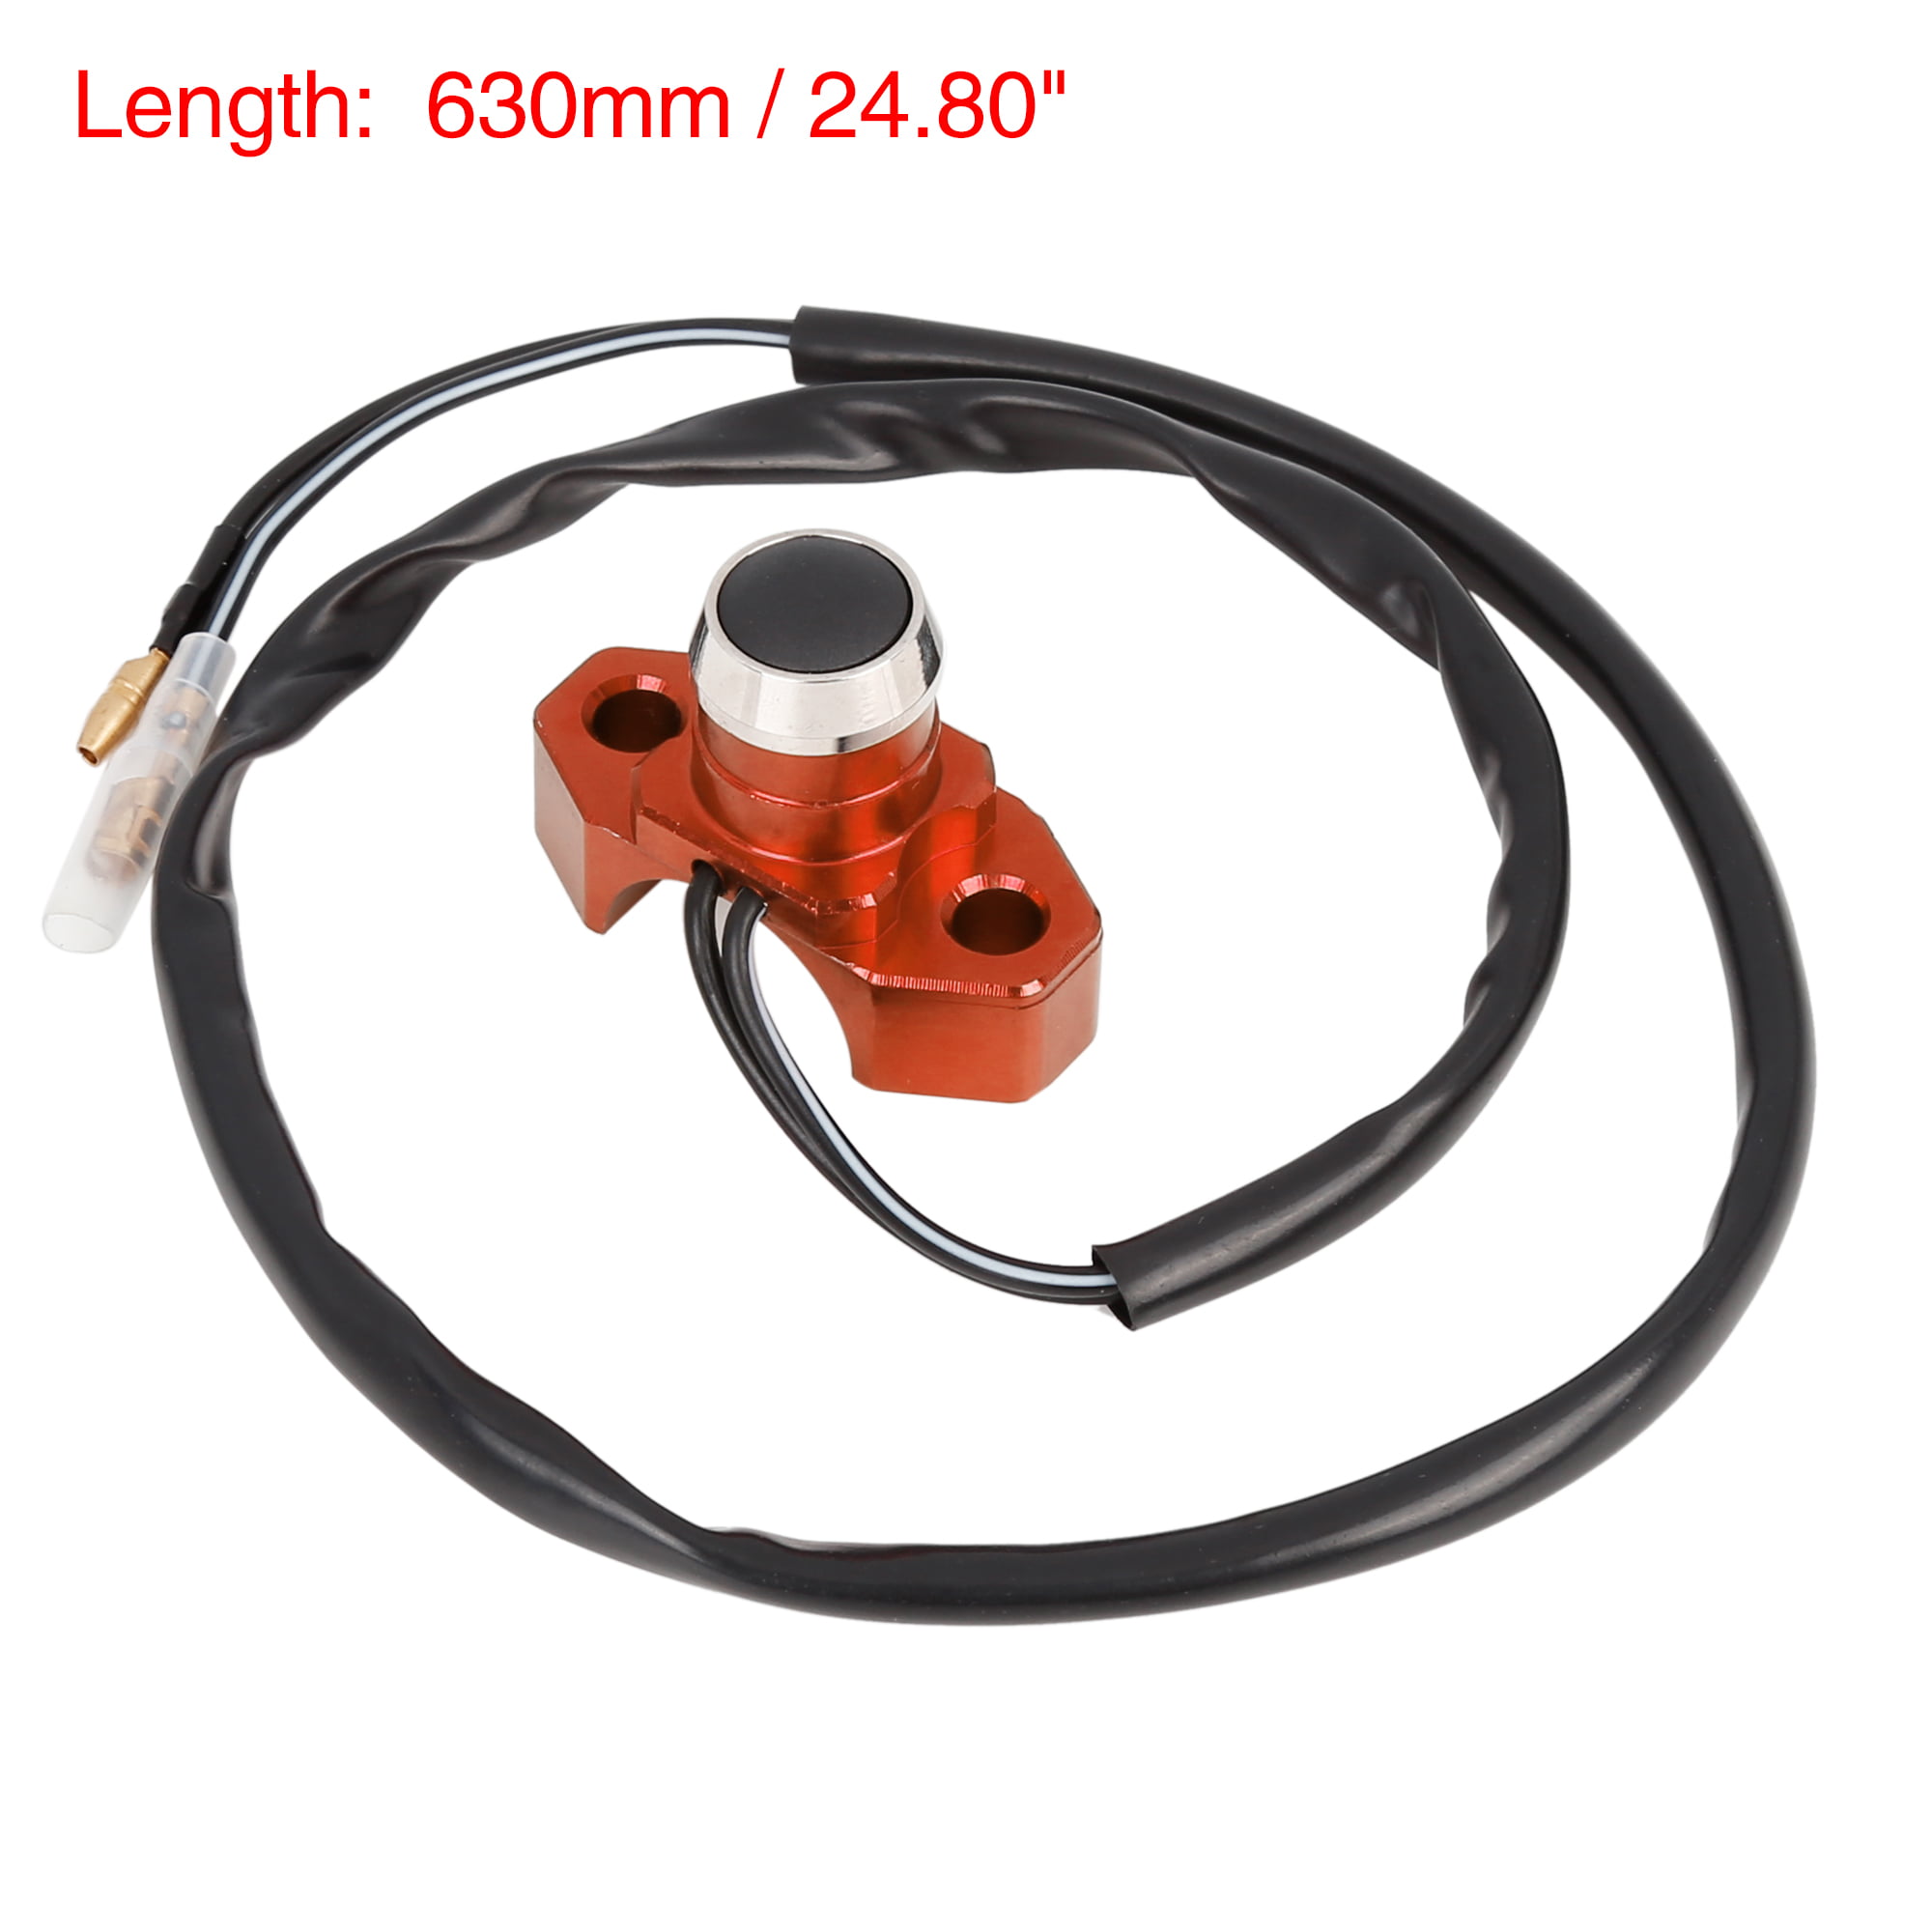 F FIERCE CYCLE Aluminum Alloy Motorcycle Handlebar Control Horn Start Switch Button Momentary Action with Two Connectors Orange